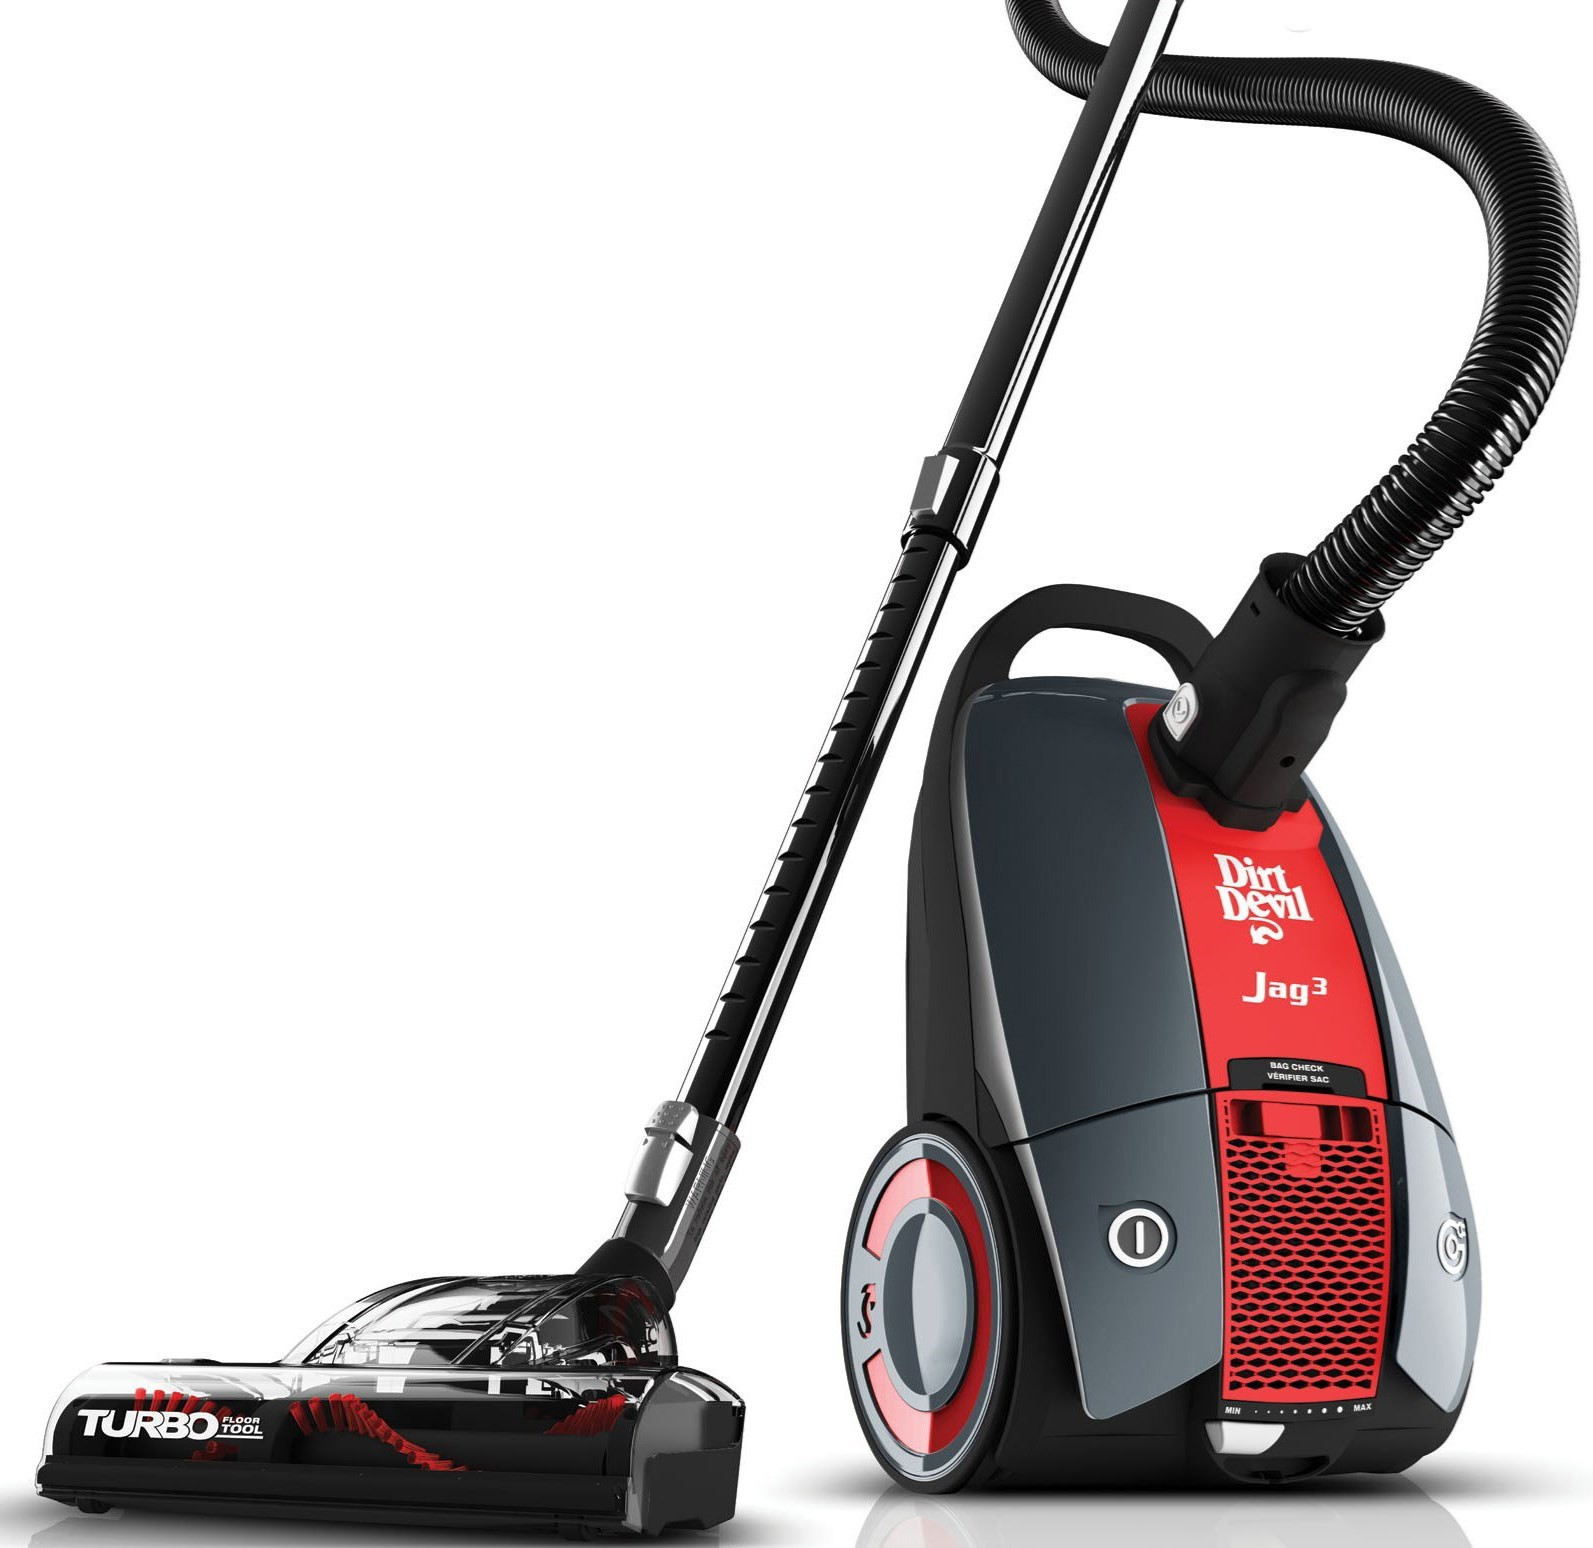 16 Recommended Best Vacuums for Hardwood Floors 2016 2024 free download best vacuums for hardwood floors 2016 of best canister vacuum cleaner reviews 2016 top 5 rated with download